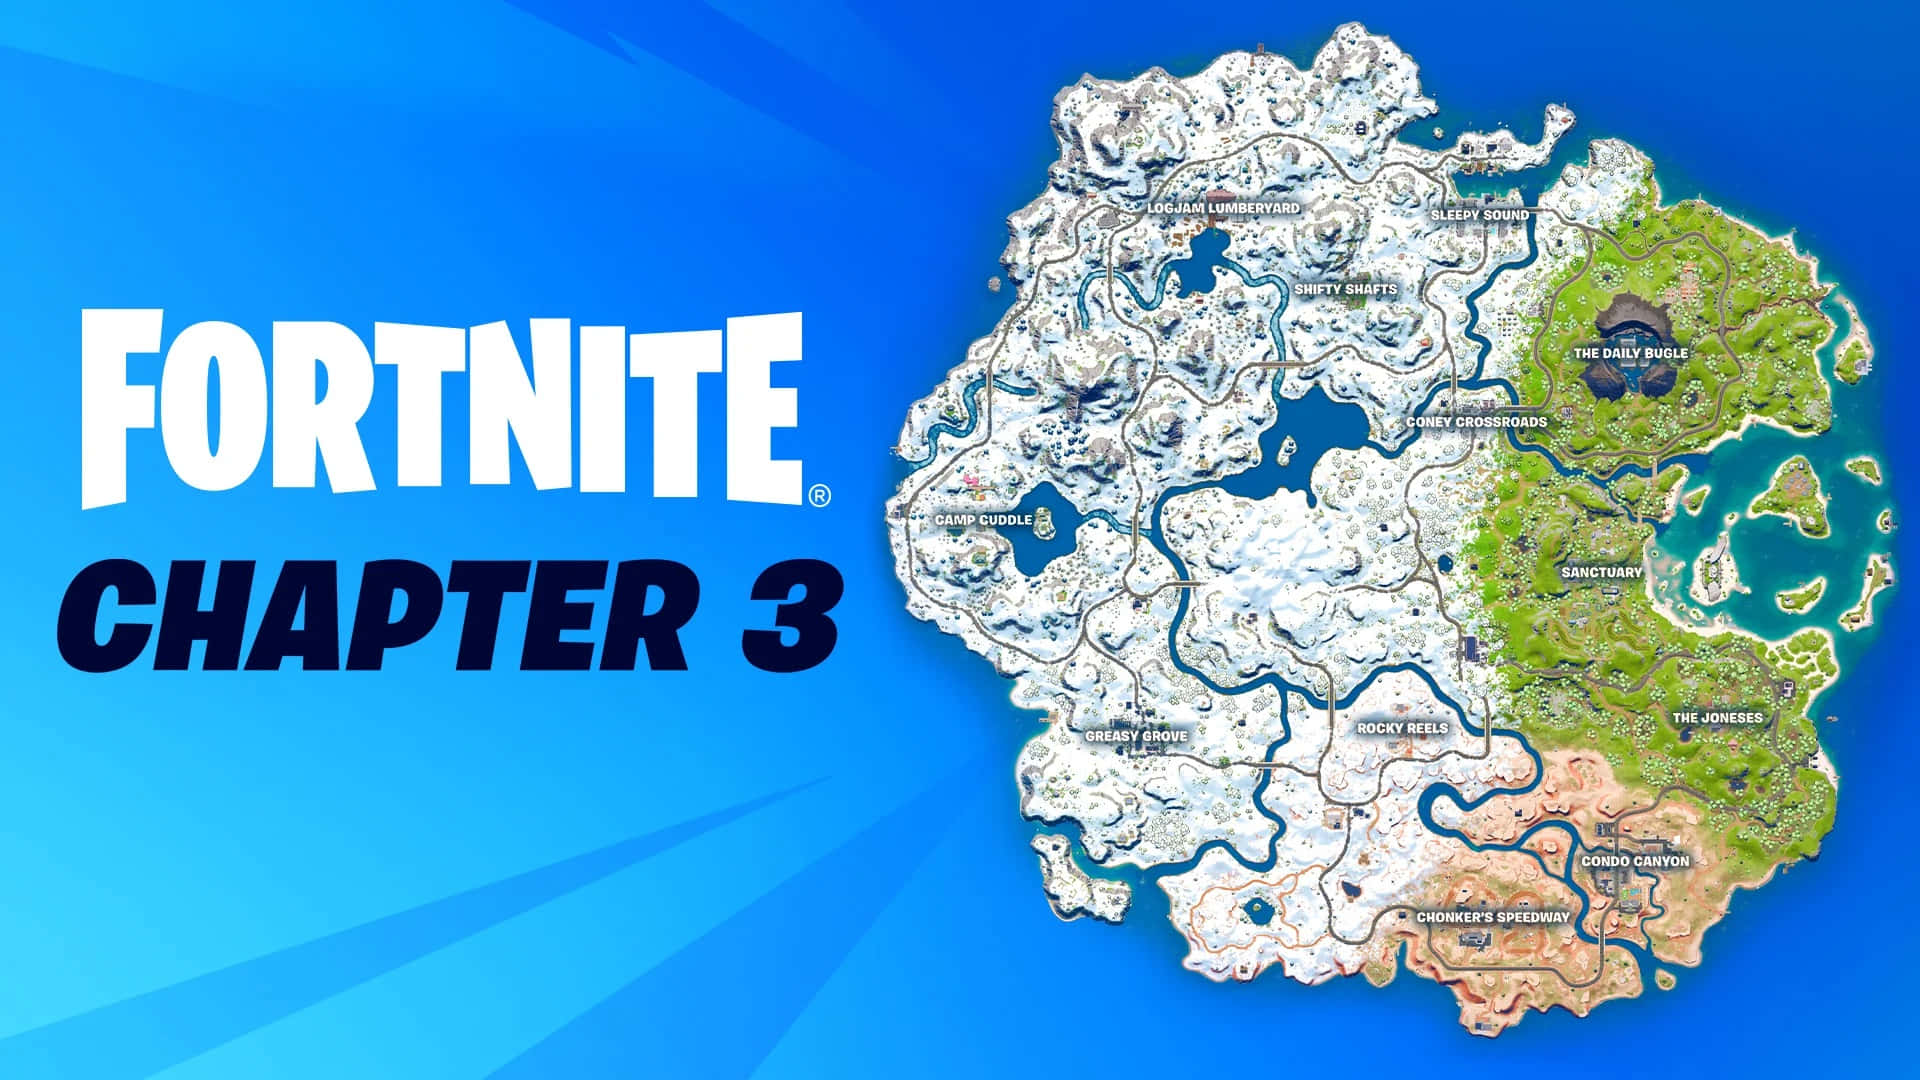 Exciting Adventures Await in Fortnite Chapter 3